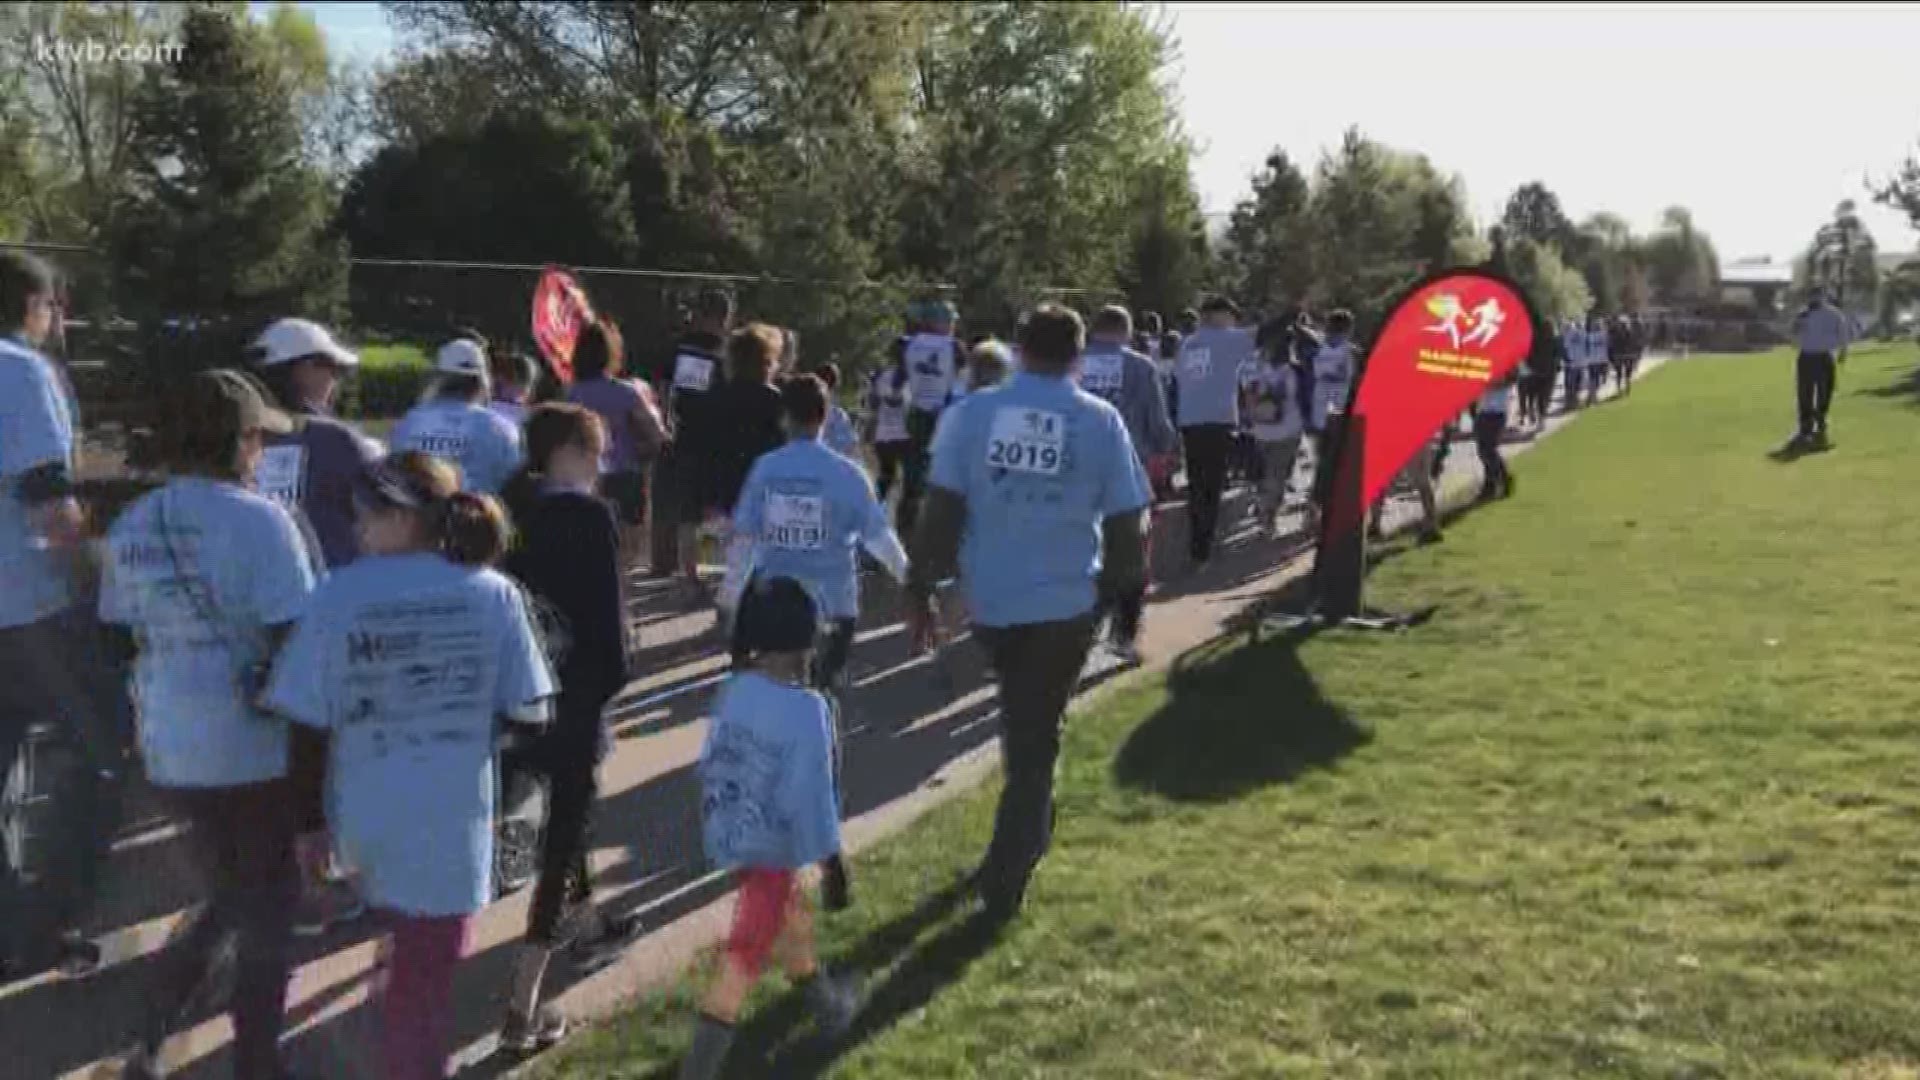 The event saw 300 people race to bring attention to life-saving organ donations.